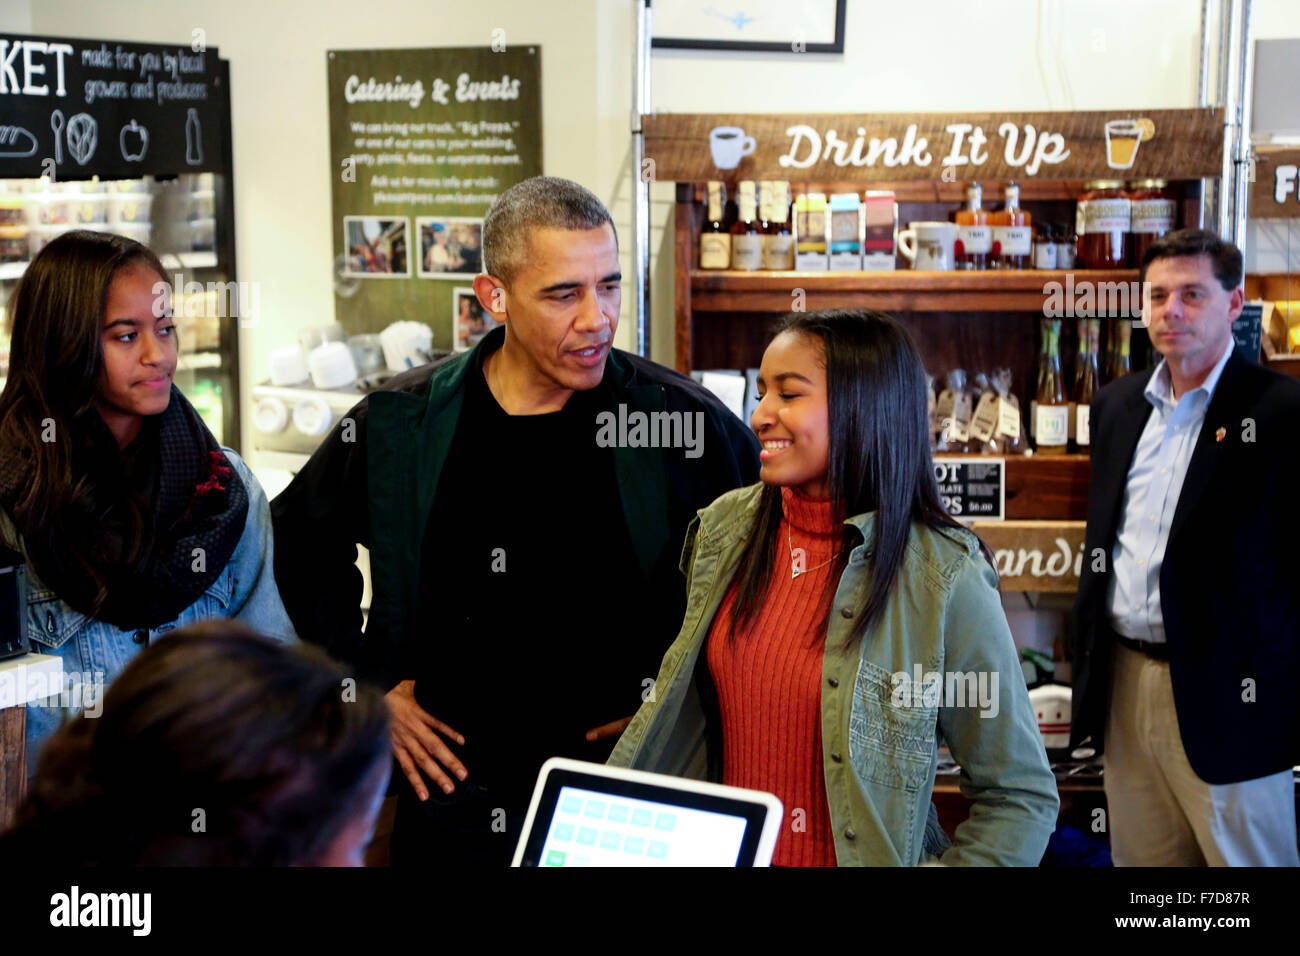 Washington, DC. 28th Nov, 2015. United States President Barack Obama buys ice cream popsicles for his daughters, Malia (L) and Sasha (R) at Pleasant Pops Farmhouse Market and Cafe in Northwest Washington, DC in support of Small Business Saturday, on November 28, 2015, in Washington, DC. Credit: Aude Guerrucci/Pool via CNP - NO WIRE SERVICE - © dpa/Alamy Live News Stock Photo